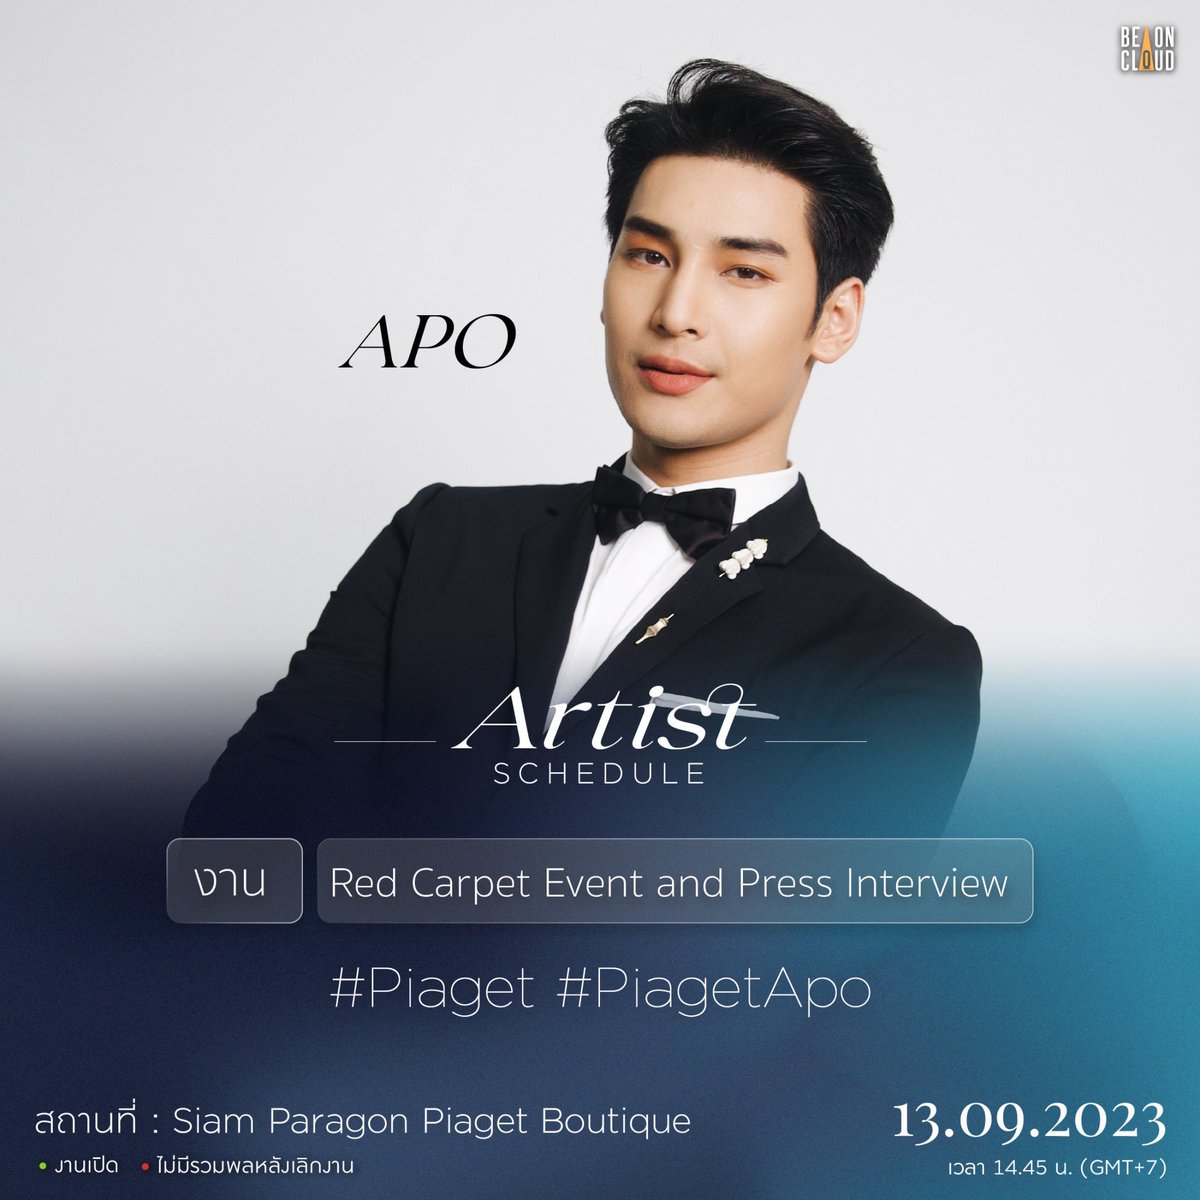 📢#apocolleagues 

Post Apo’s invite on your Instagram

Tags: @. Piaget @. siamparagonshopping
@.Piaget

HT: #MaisonOfExtraleganza #PiagetPossession 
#OwnTheMoment #Nnattawin #metaphoria #extraleganza #piaget #piagetsociety #ManSuangGala 
#แมนสรวงปฐมทัศน์ #Swisswatches #Richemont…